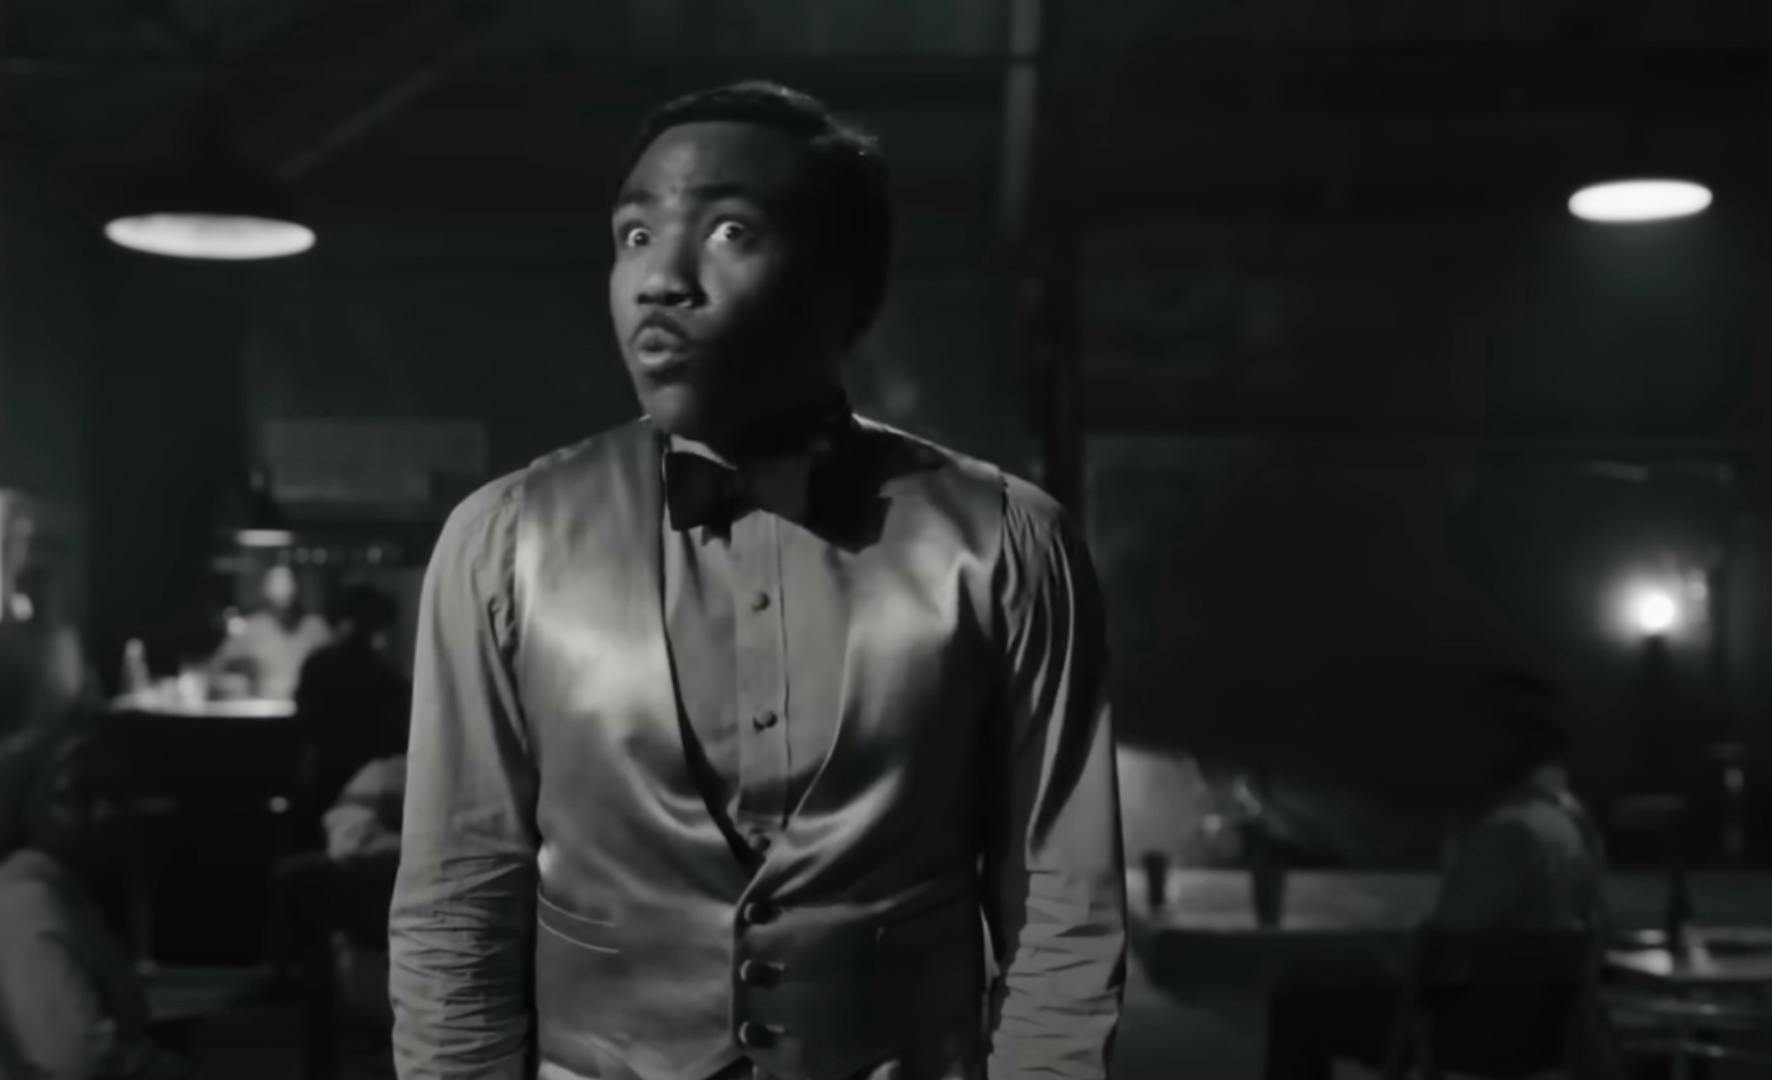 Black and white still of Childish Gambino in the jazz era from his music video Little Foot Big Foot